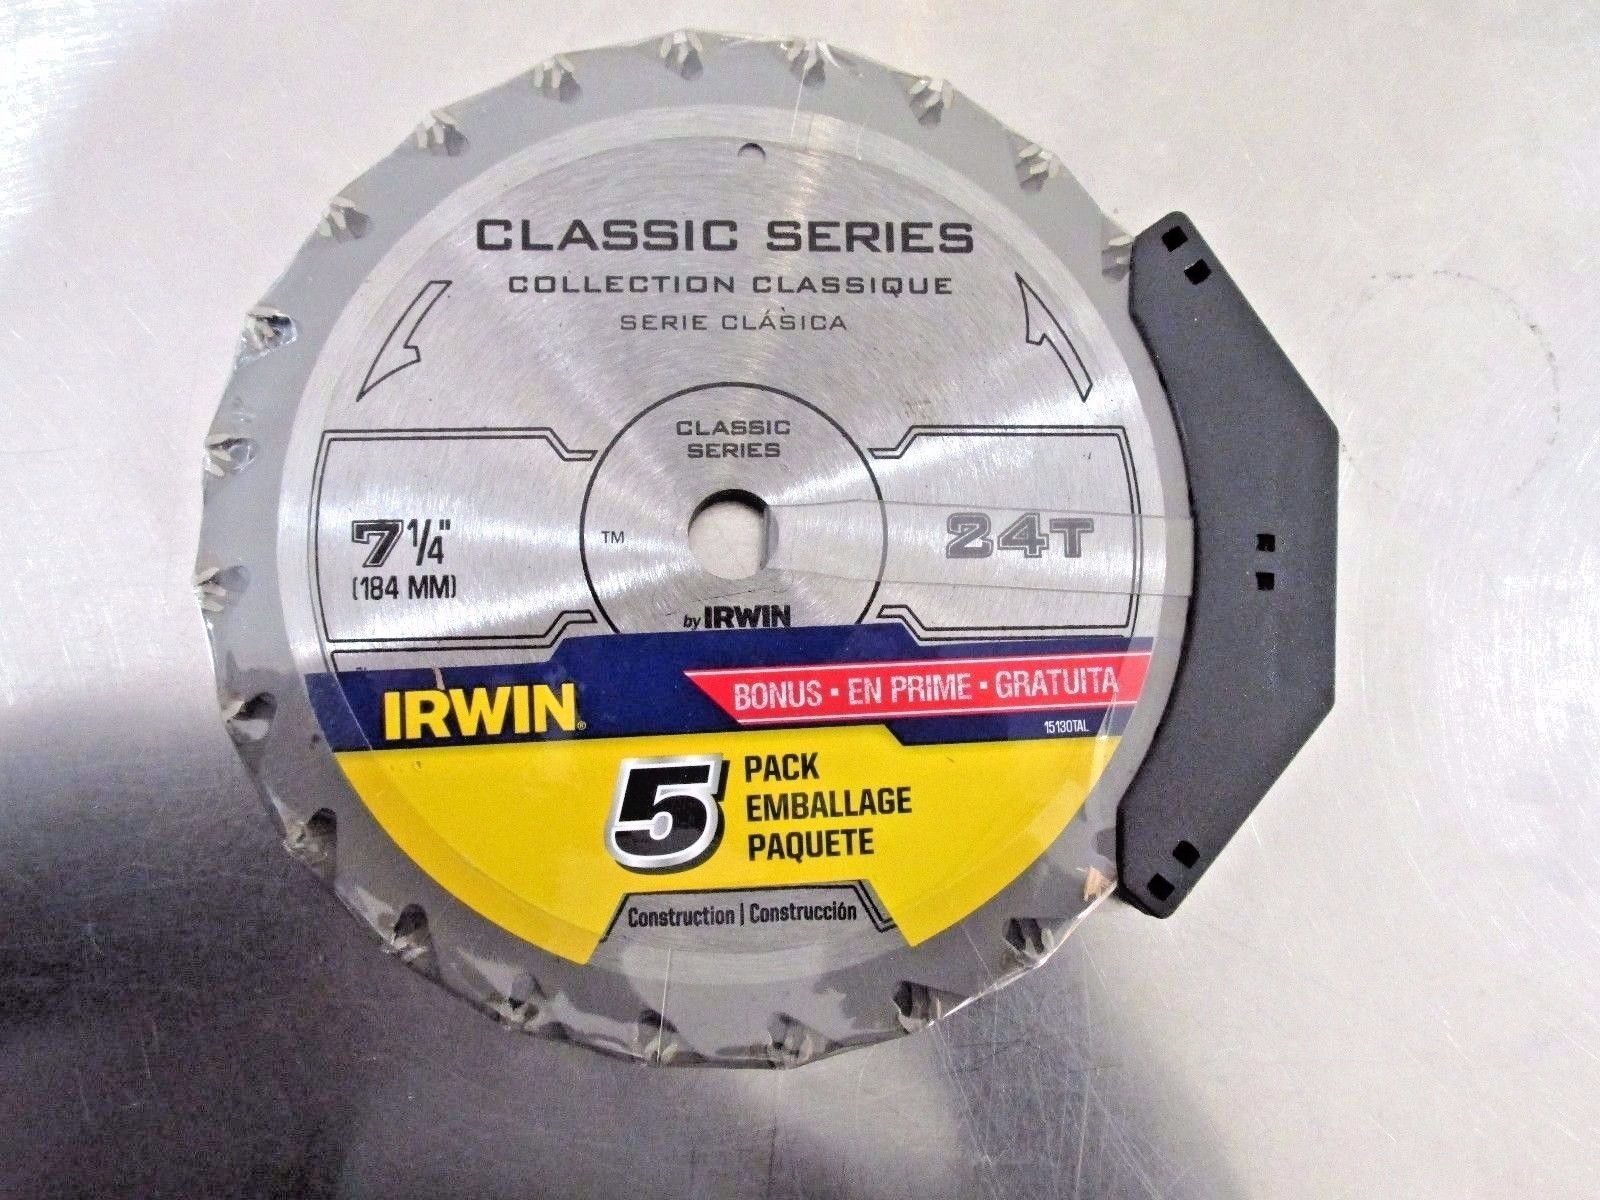 Irwin 15130TAL Classic Series 7-1/4" x 24T Framing & Ripping Saw Blade 5 Pack